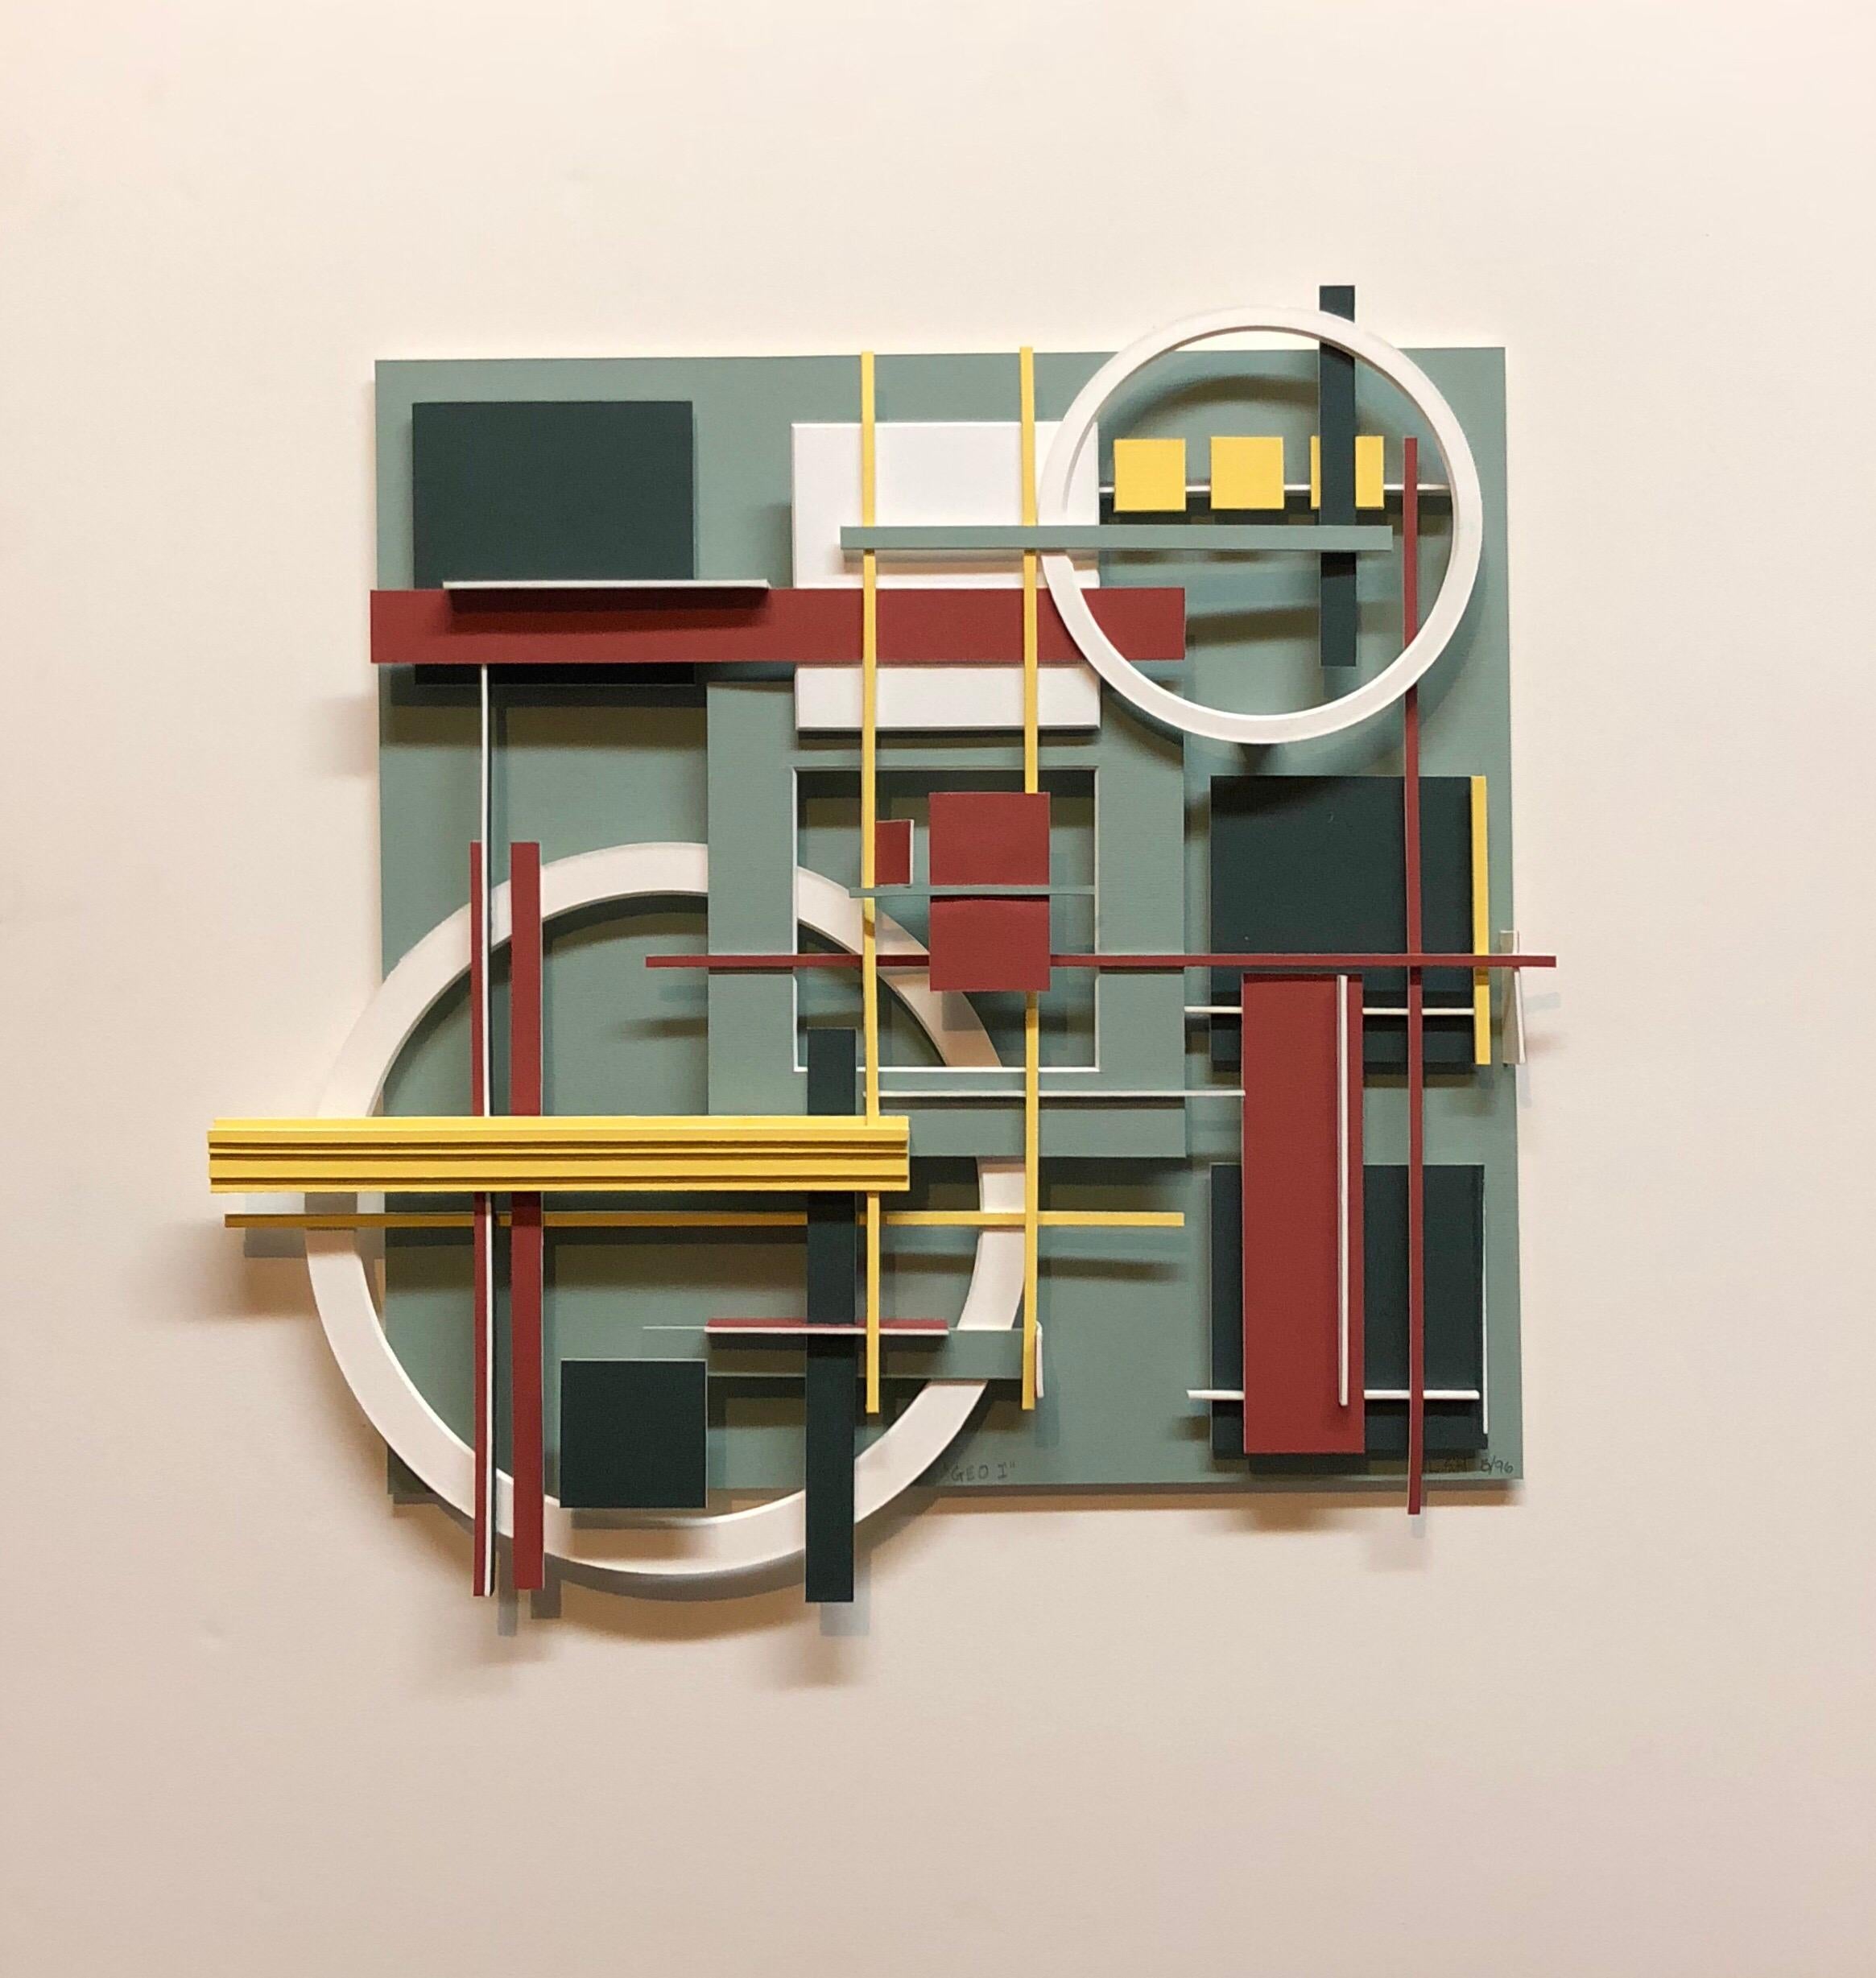 Construction Assemblage of mat board or Bristol board. titled Geo 1 and signed and dated verso.

Lawrence Saul Heller, (Larry Heller)
(American, born 1965)
Born Great Neck, NY
Kent State University School of Architecture Kent, OH
Practicing